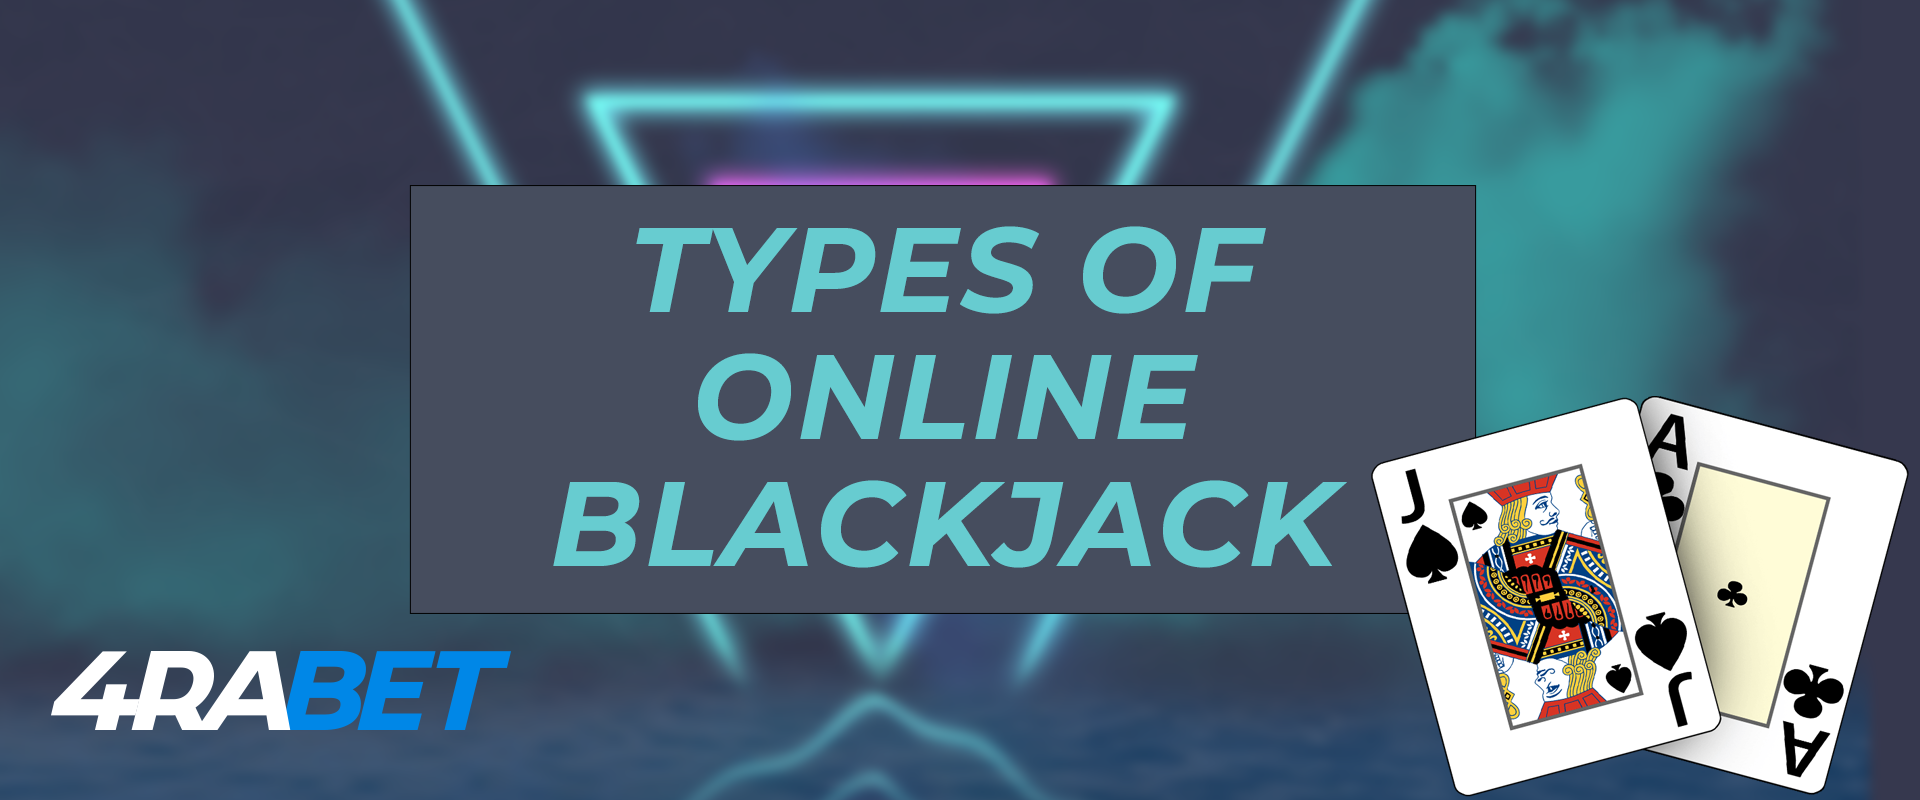 All sorts of online blackjack on the 4rabet site.